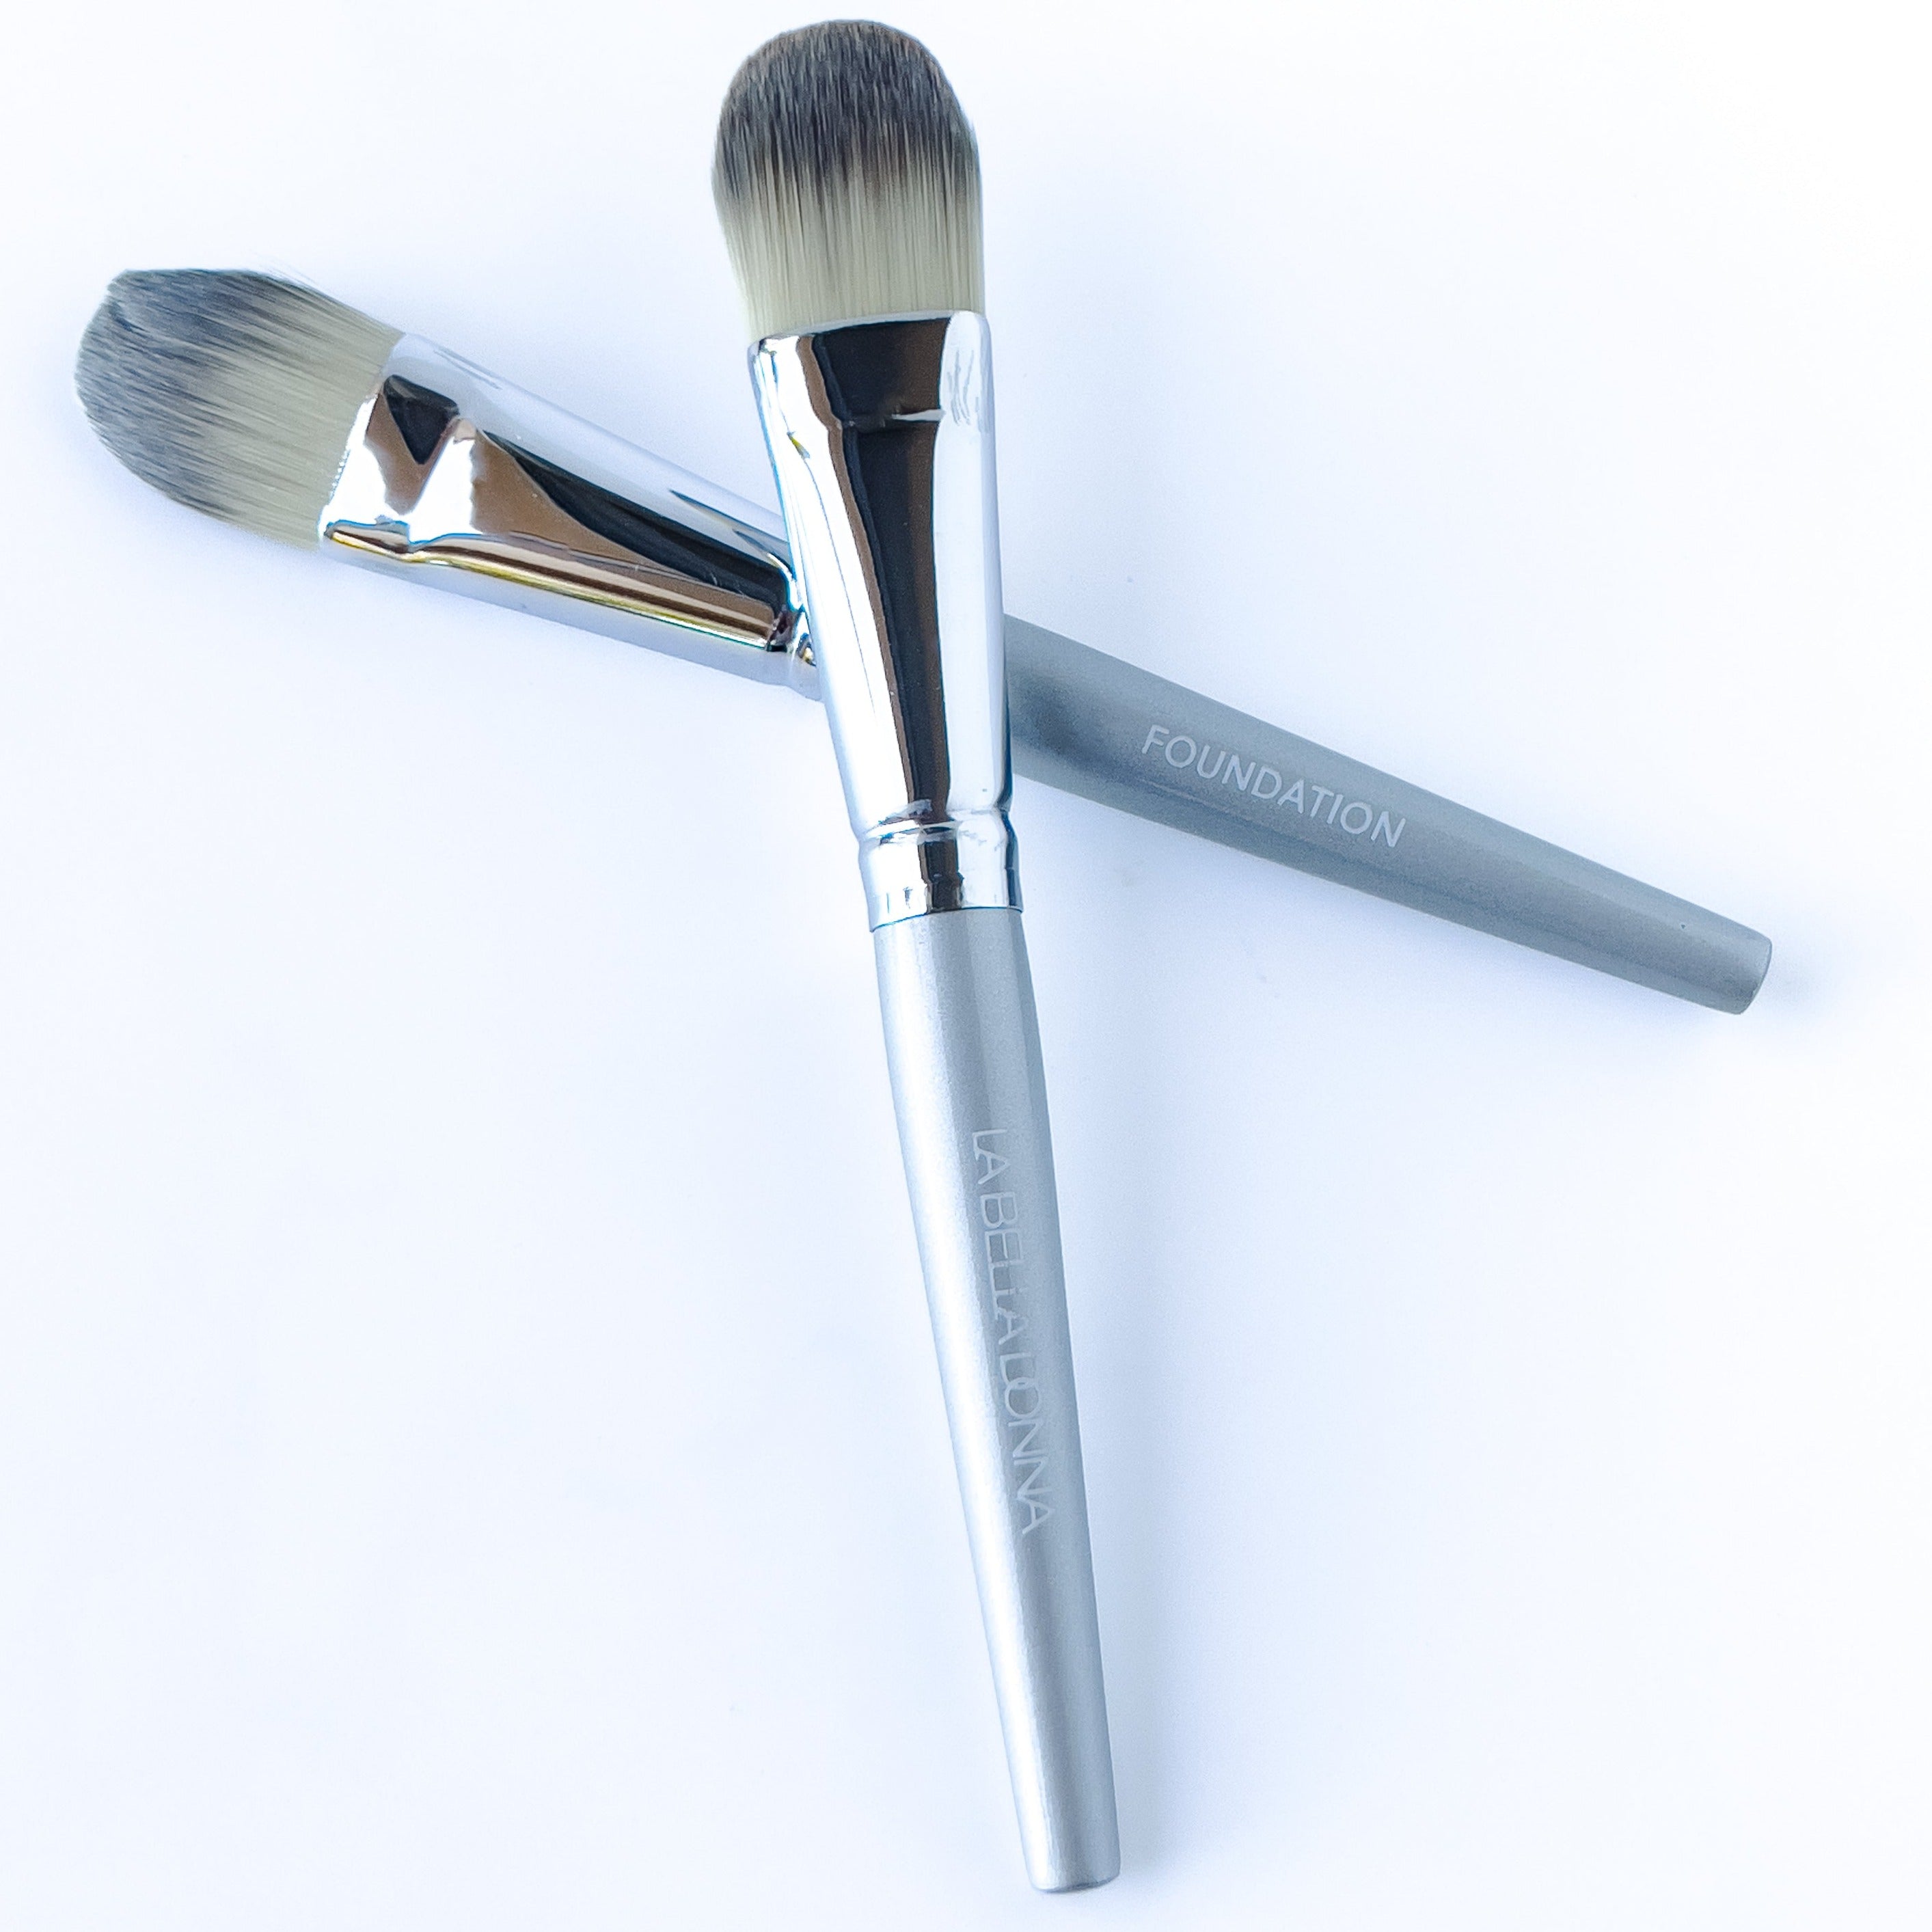 Two medium application brushes are shown. The handle is metal towards the medium brush tip with a gray handle inscribed with "La Bella Donna"